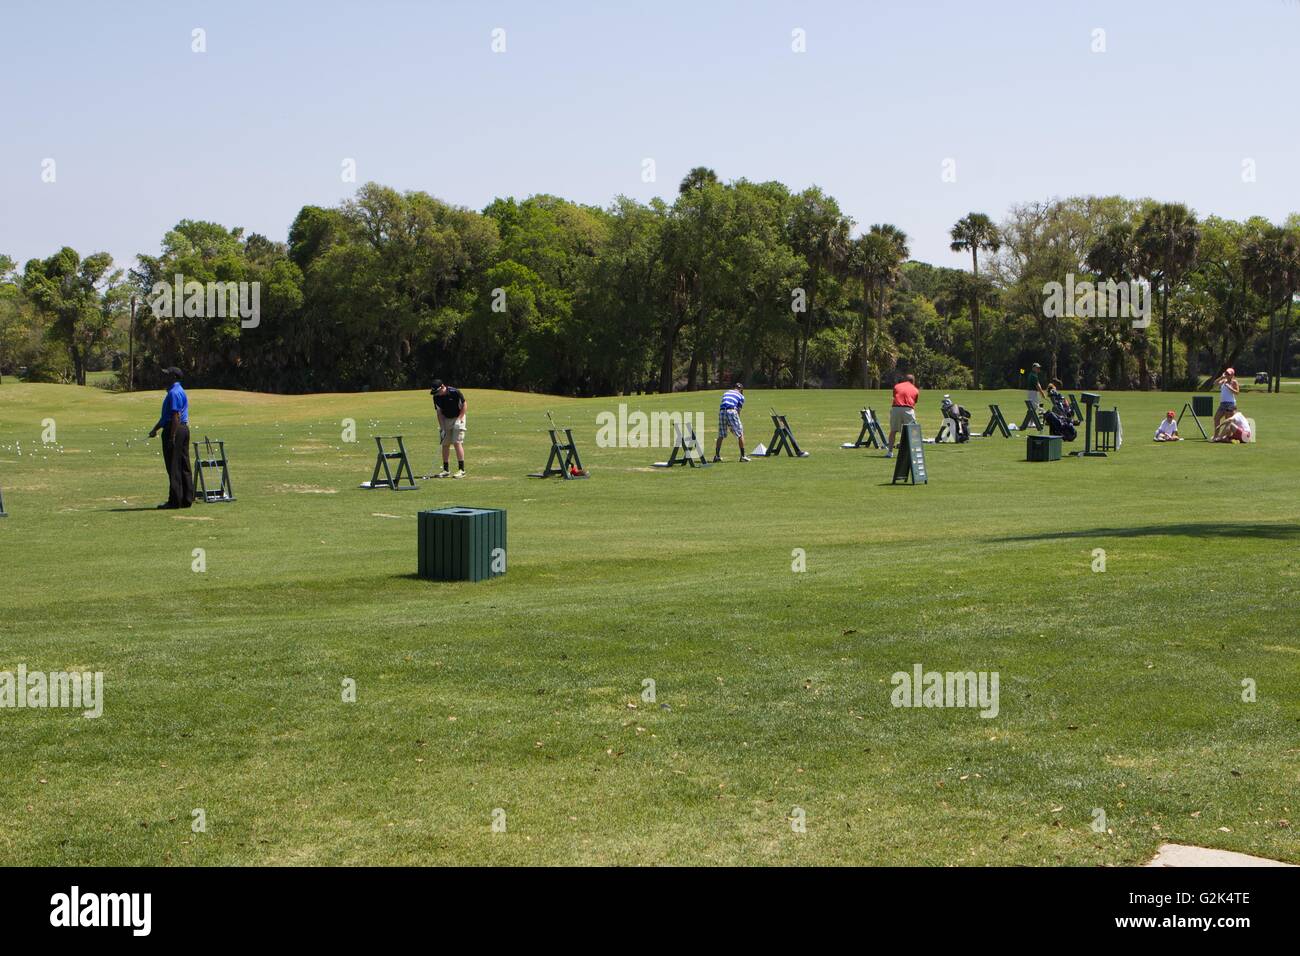 Golfers on a the driving range Stock Photo